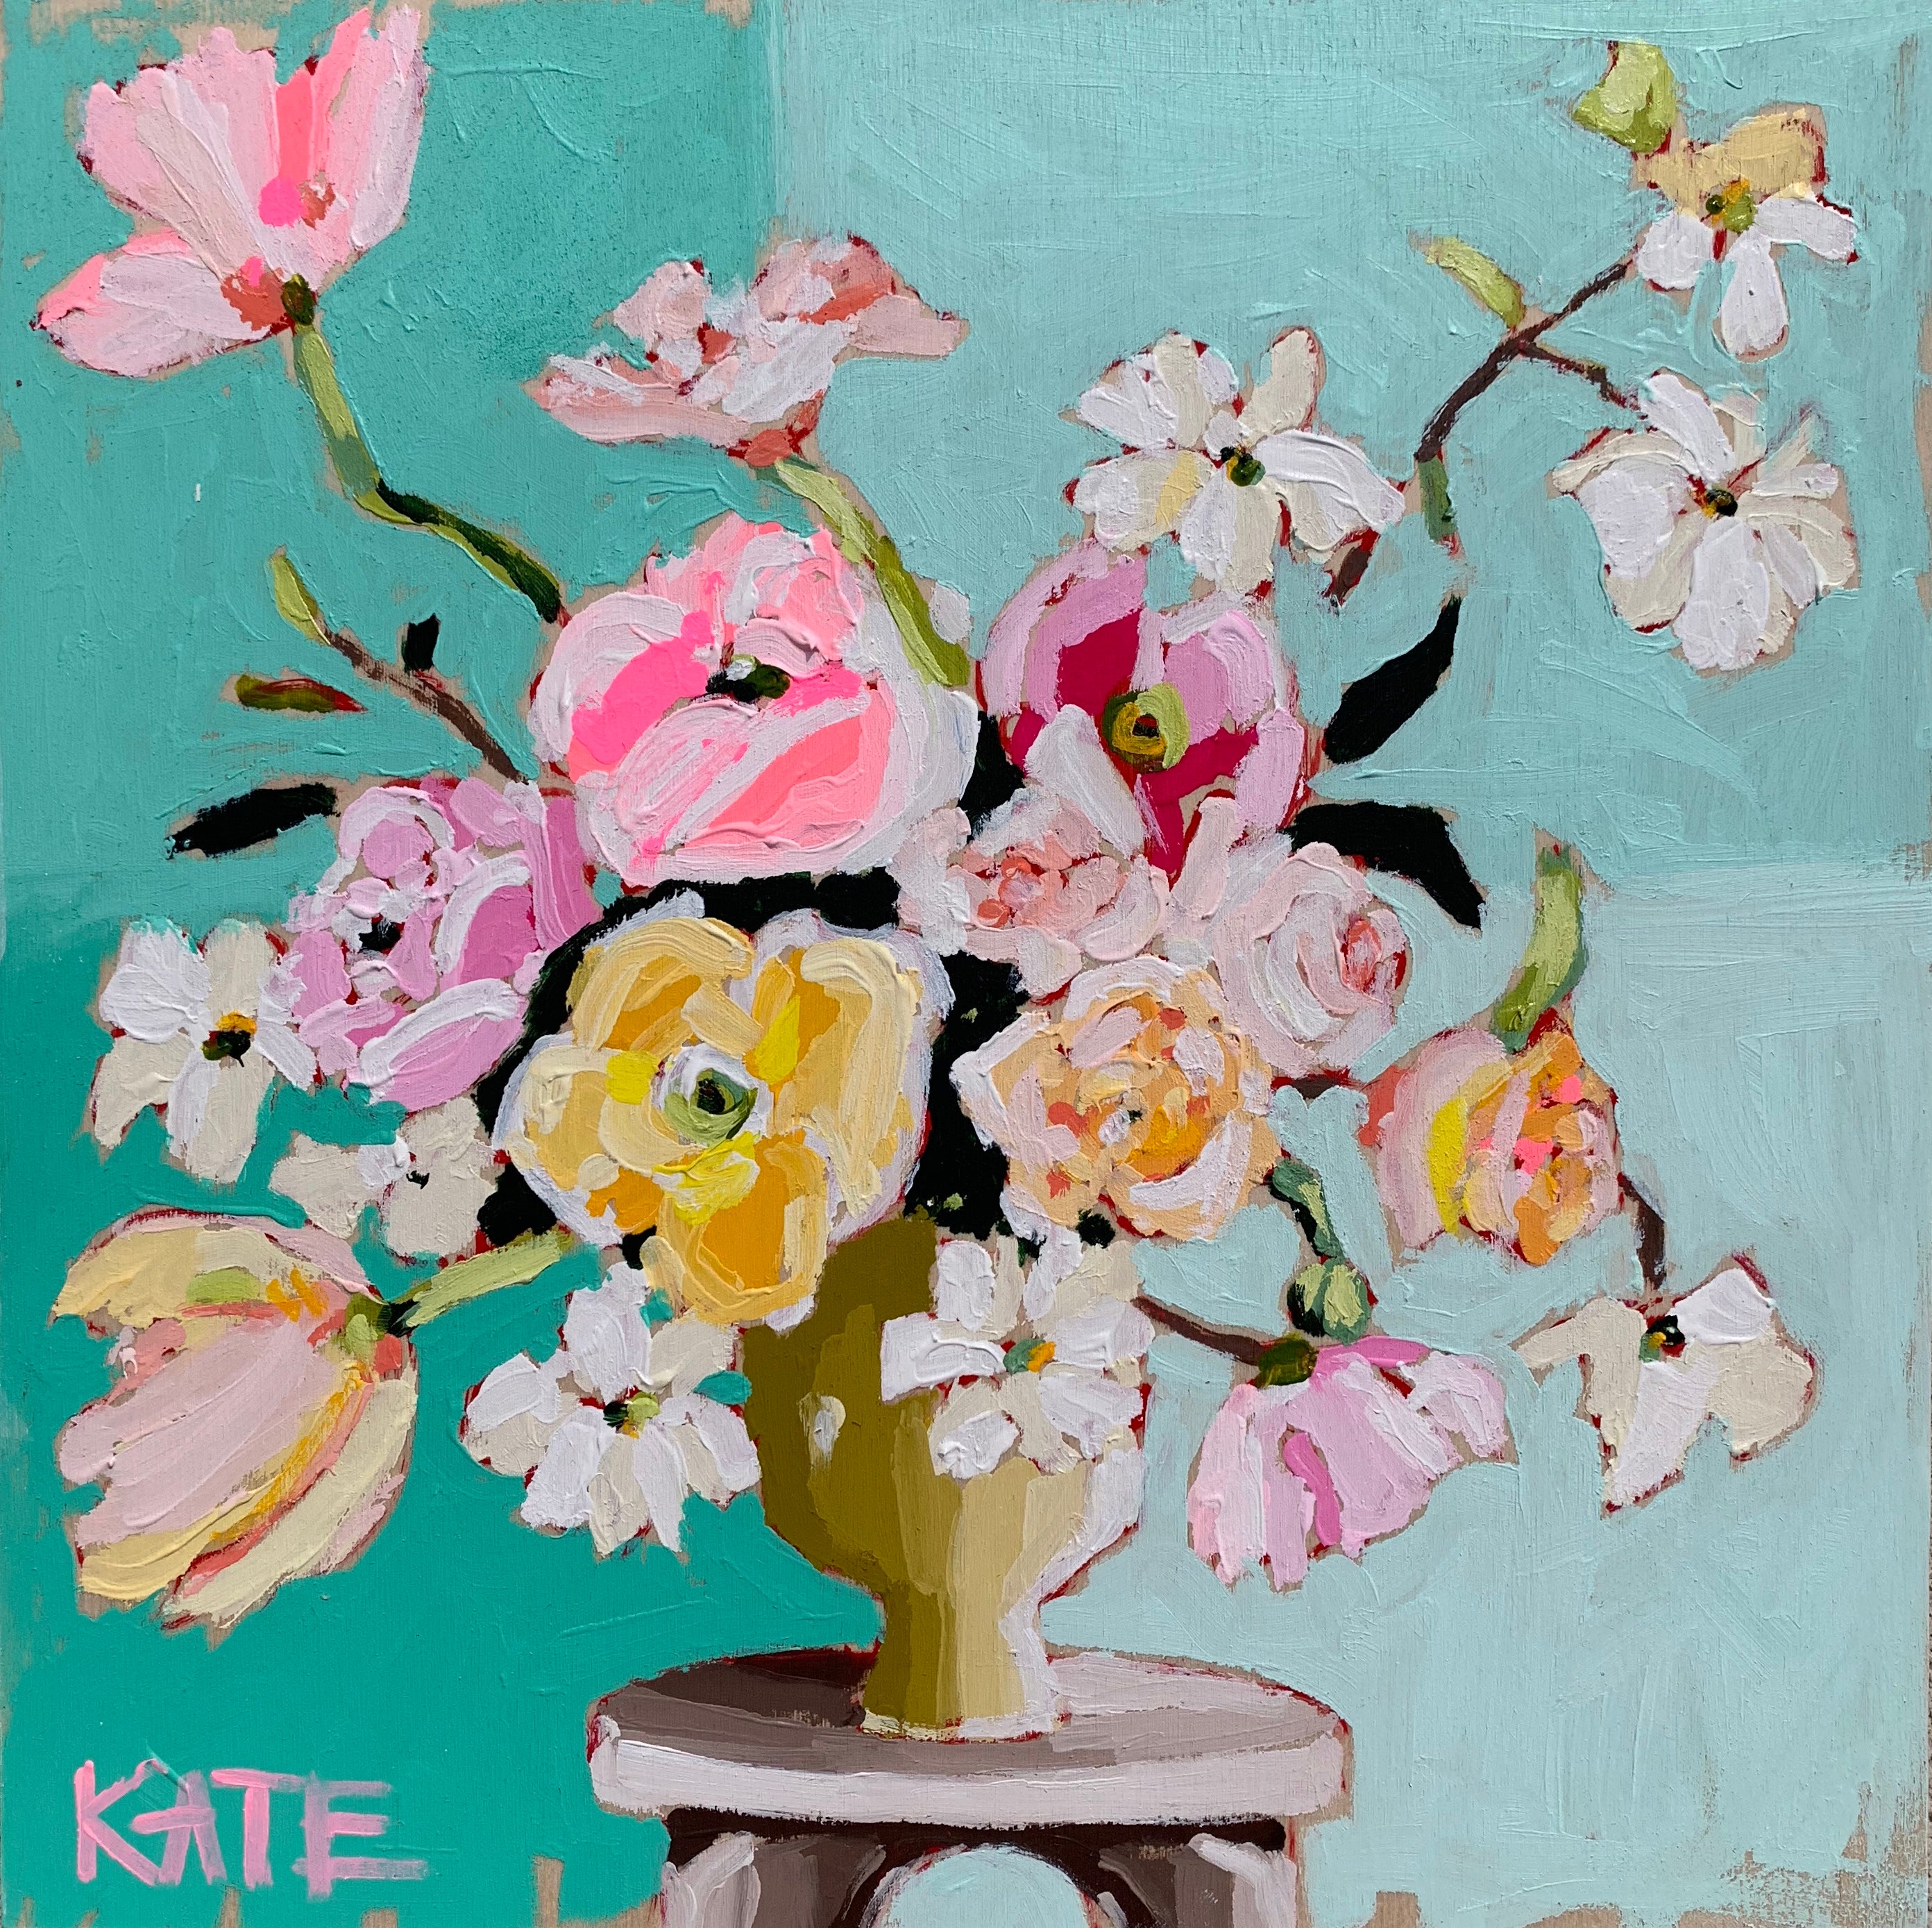 Afternoon with Katie 12x12